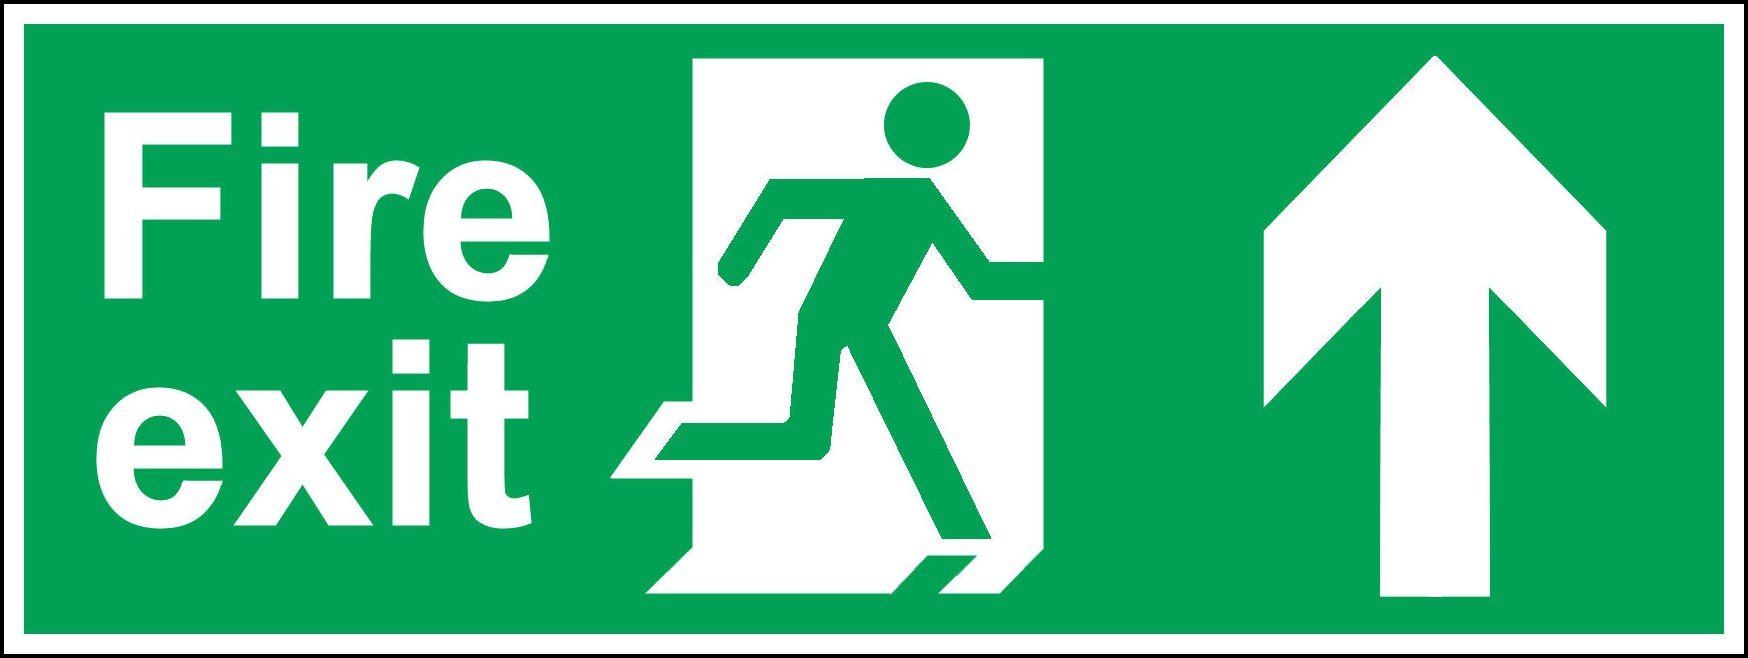 Fire Exit Sign Laminated Board